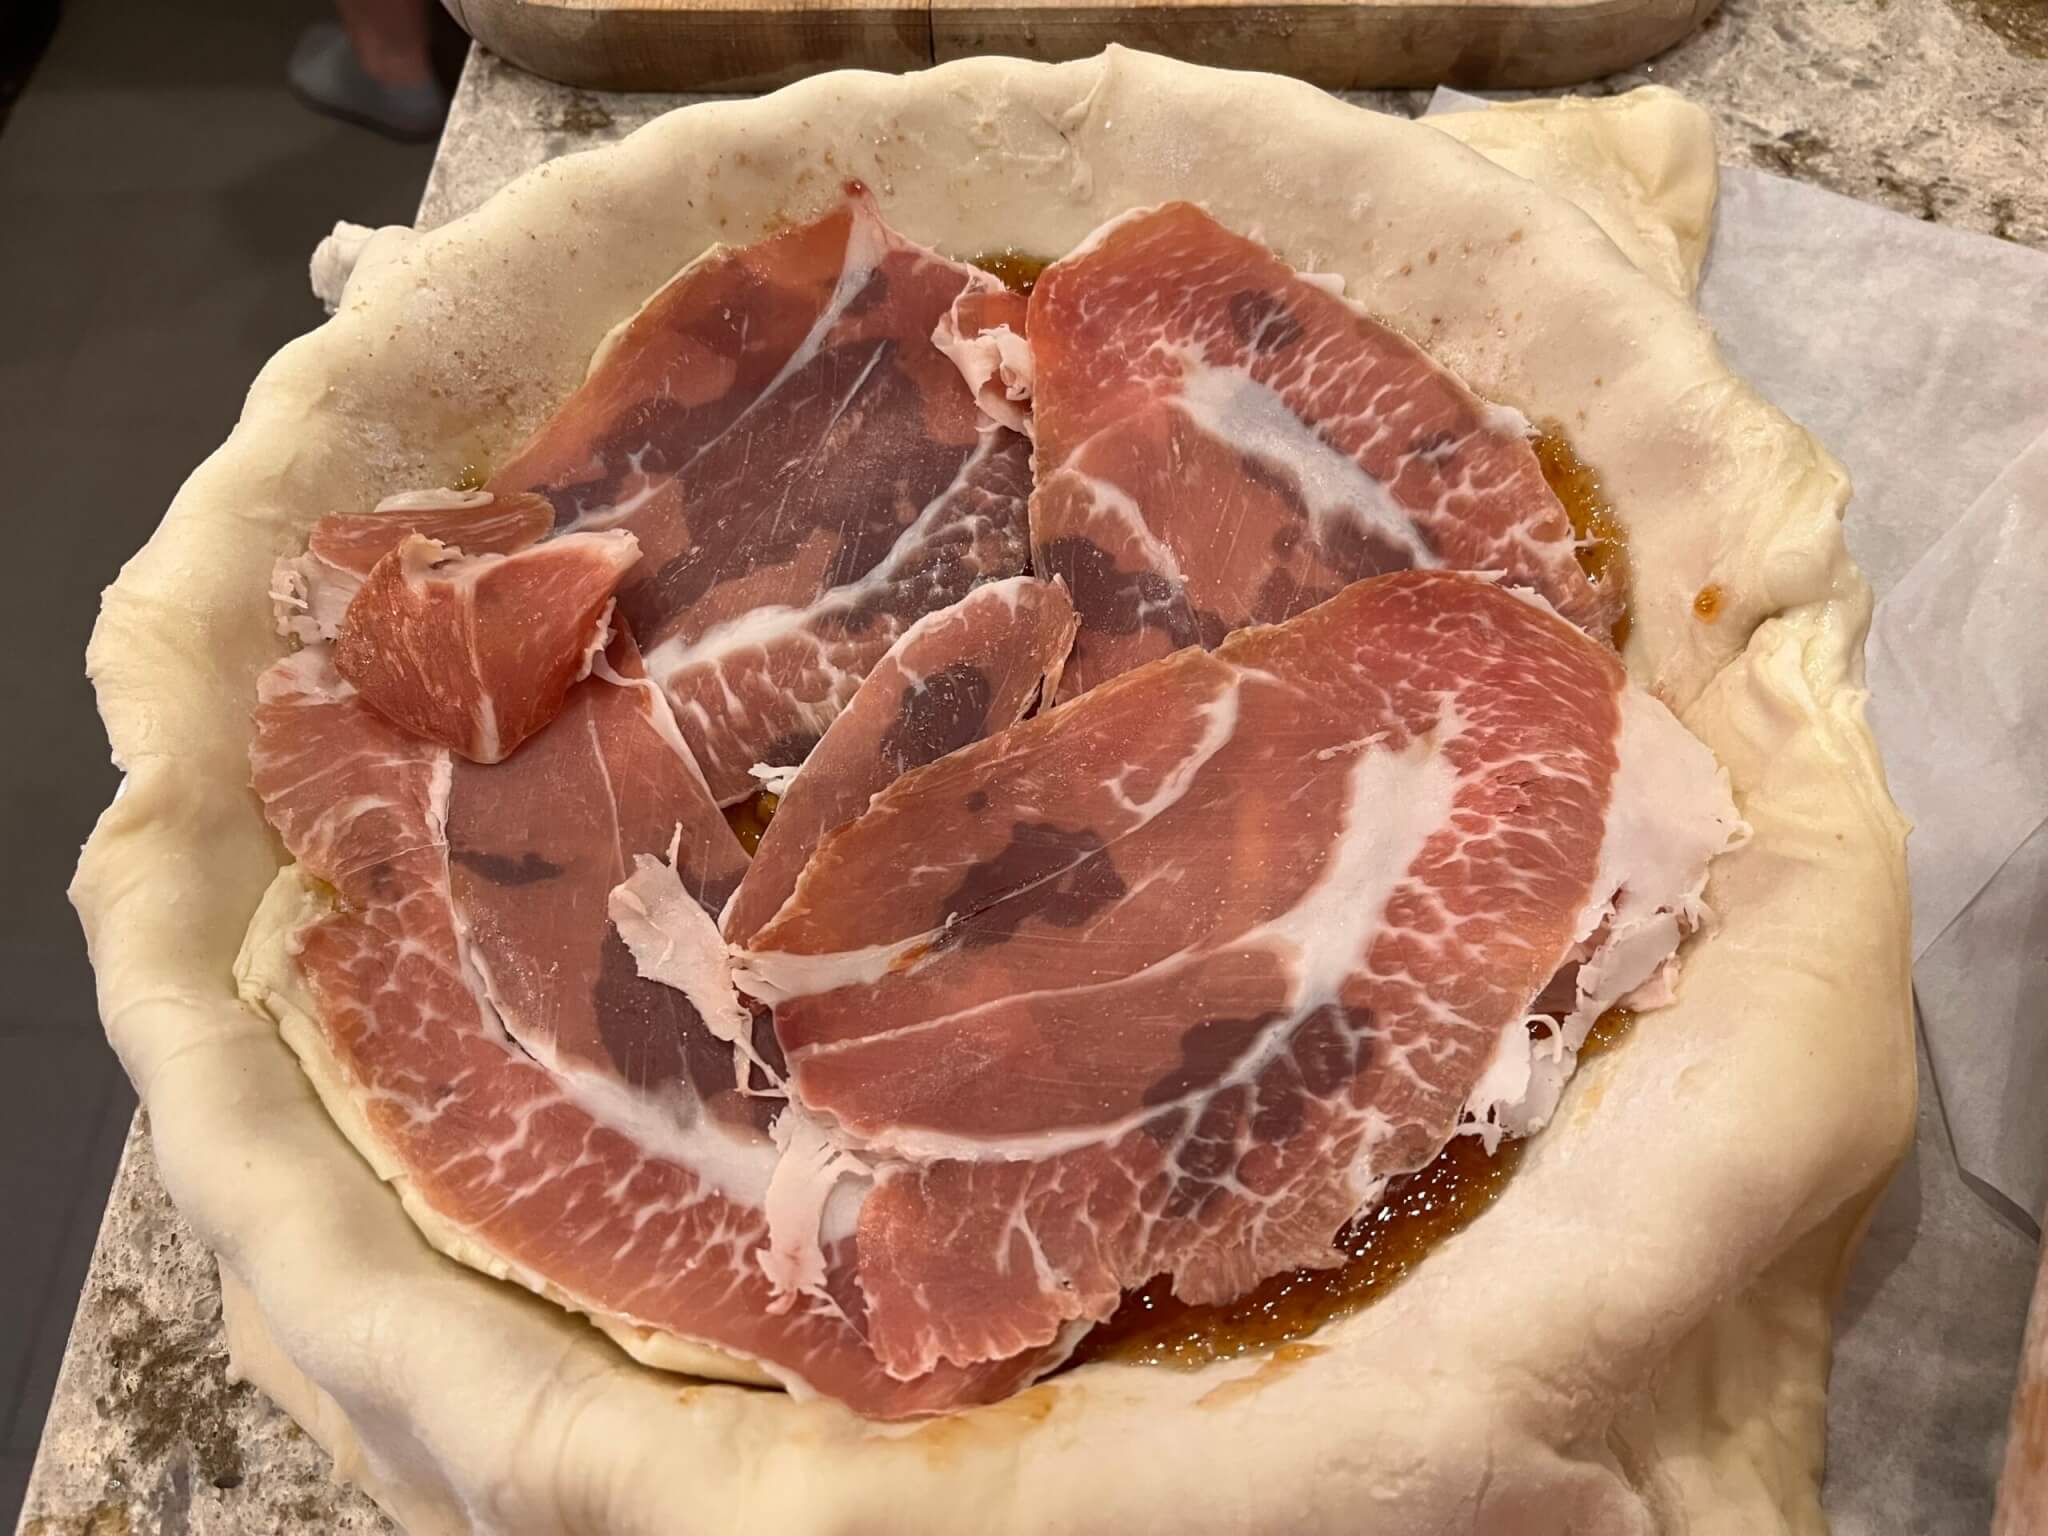 Lemon Fig, Prosciutto and Goat's Cheese Tart being made - this image shows the prosciutto layered on top of the New Canaan Farms jam that has been spread on a rolled out pastry case